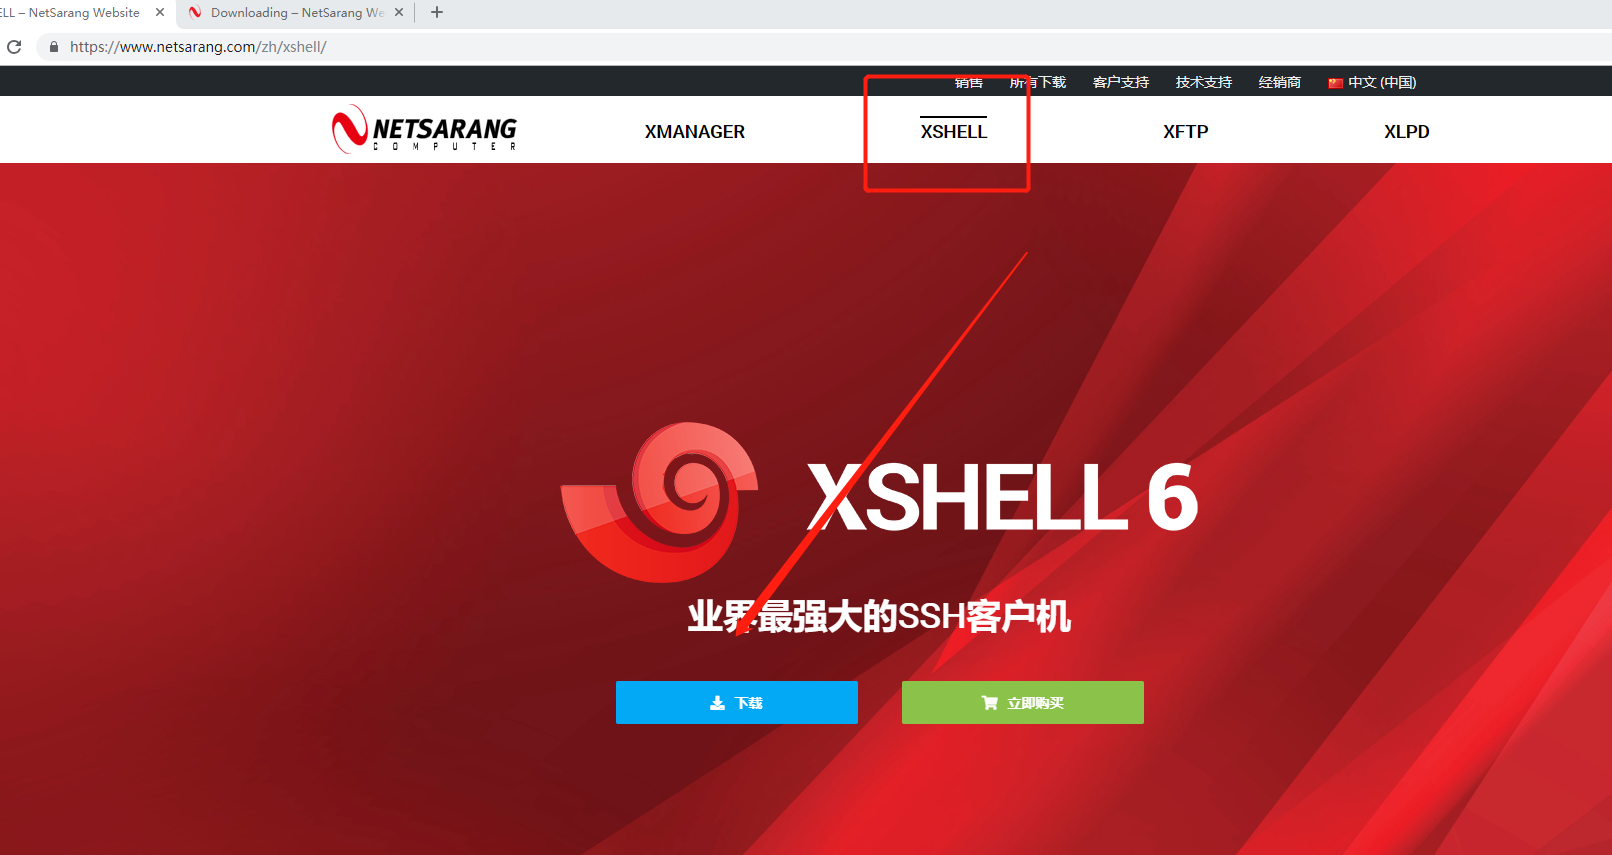 xshell 4 for windows xp